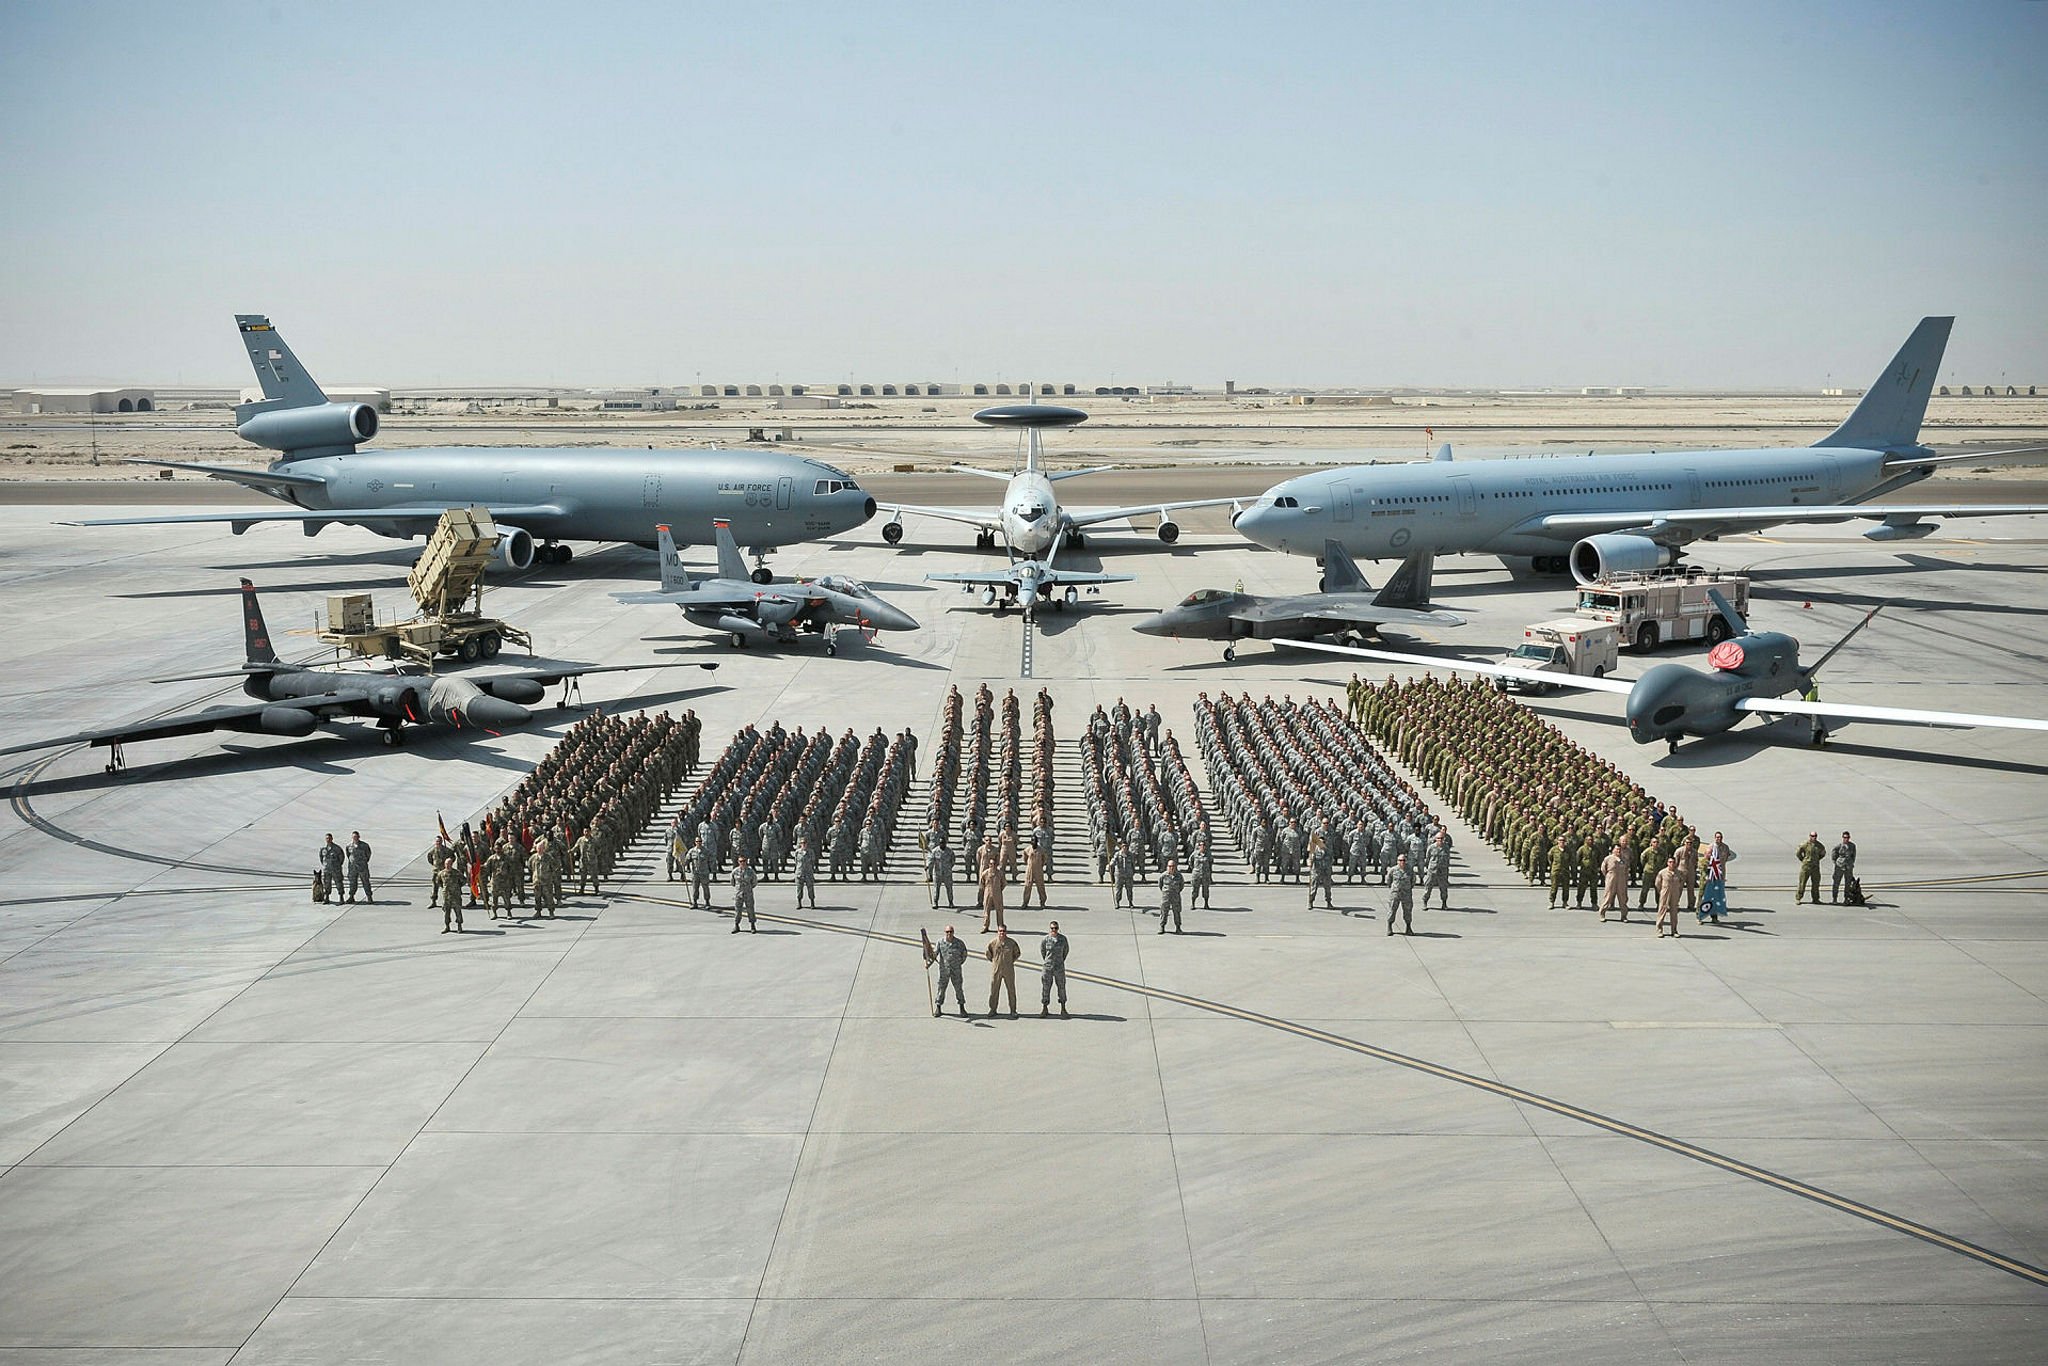 In the photo below, soldiers and airmen from the international coalition to thwart ISIS stand in front of some of the most powerful military aircraft in the world. From left to right, we see a U-2 spy plane, a KC-10 tanker, an F-15 Eagle, an F-18 jet in front of an E-3, a KC-30A tanker, an F-22 Raptor, and an RQ-4 Global Hawk drone.From left to right, we see a U-2 spy plane, a KC-10 tanker, an F-15 Eagle, an F-18 jet in front of an E-3, a KC-30A tanker, an F-22 Raptor, and an RQ-4 Global Hawk drone.